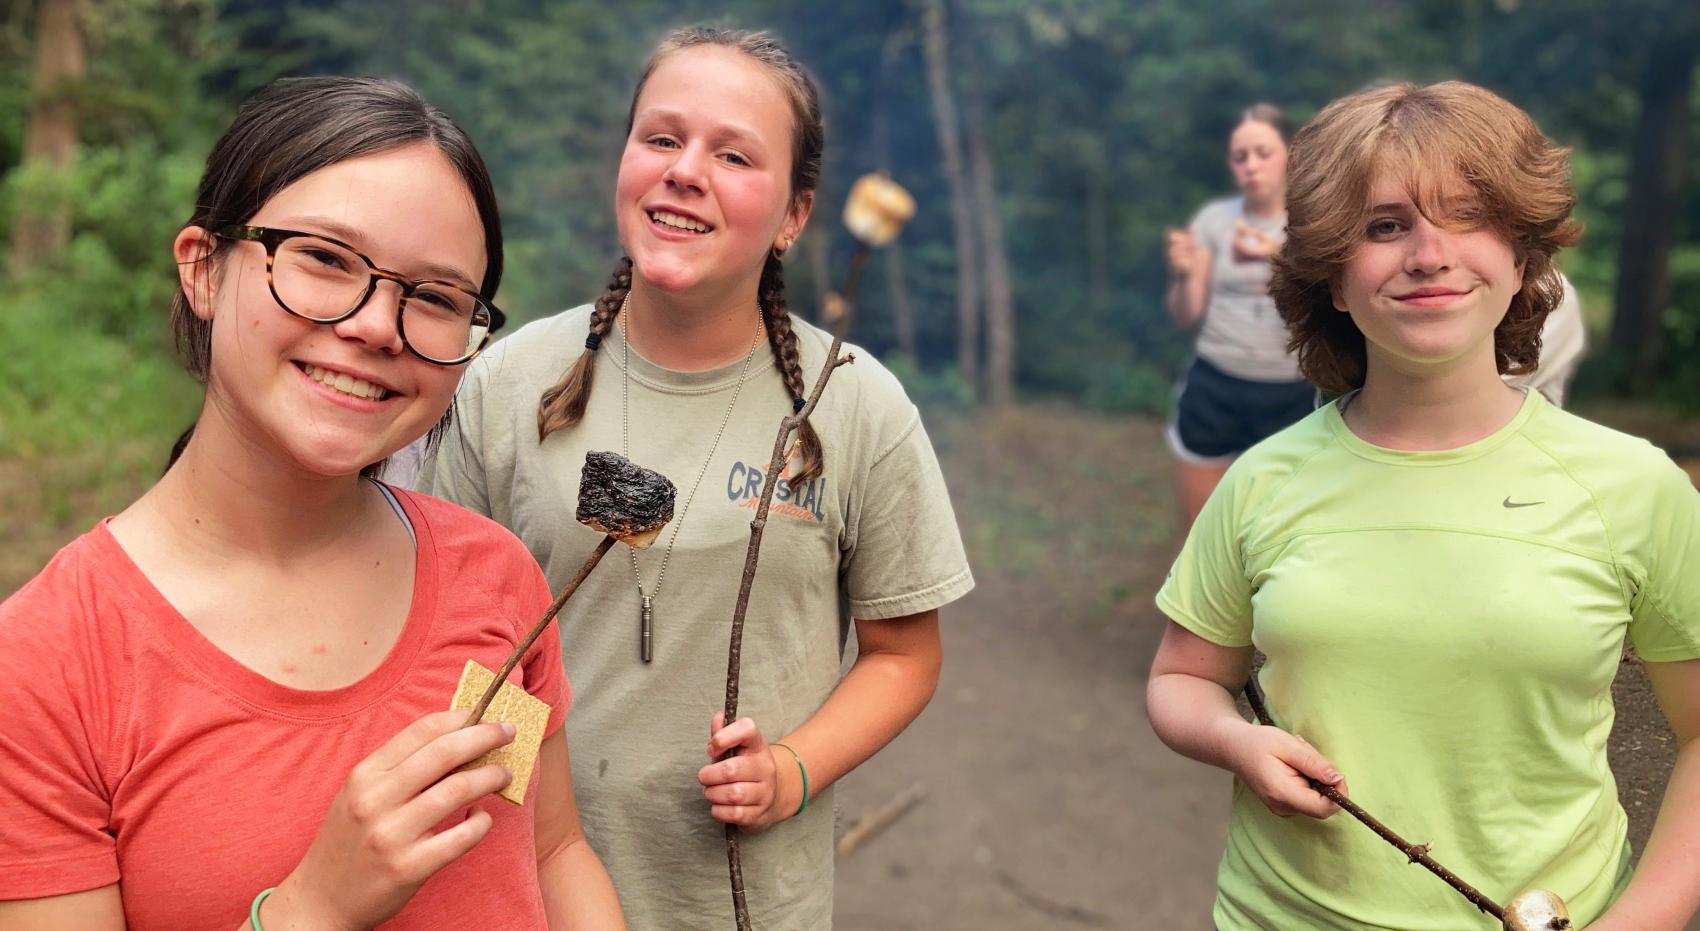 campers holding s'mores